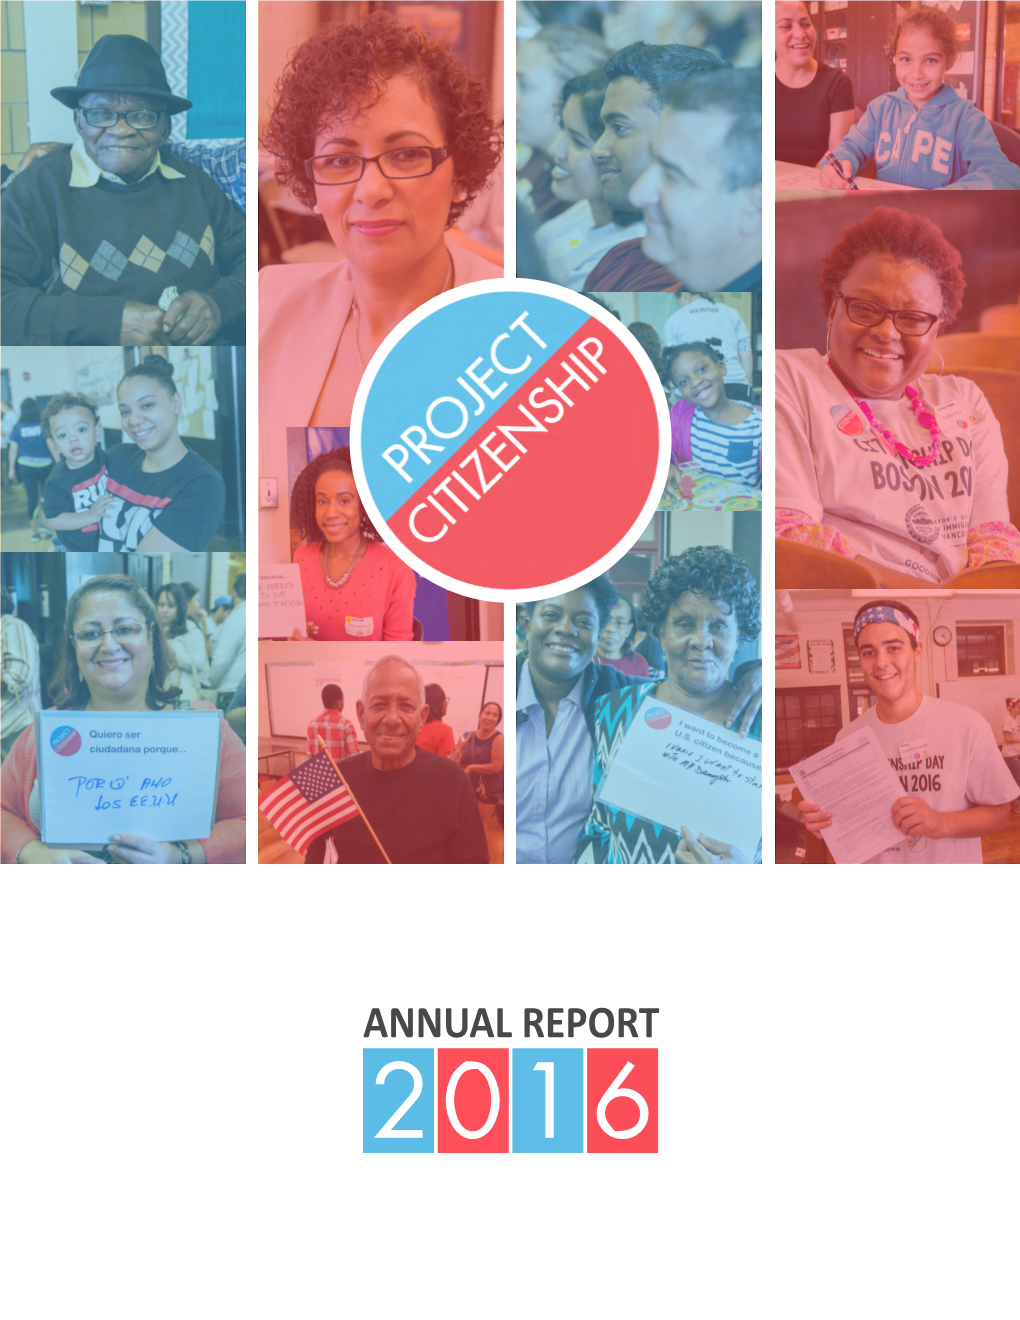 ANNUAL REPORT 20 1 6 0 2 PROJECT CITIZENSHIP a YEAR of EXPONENTIAL GROWTH! Dear Friends